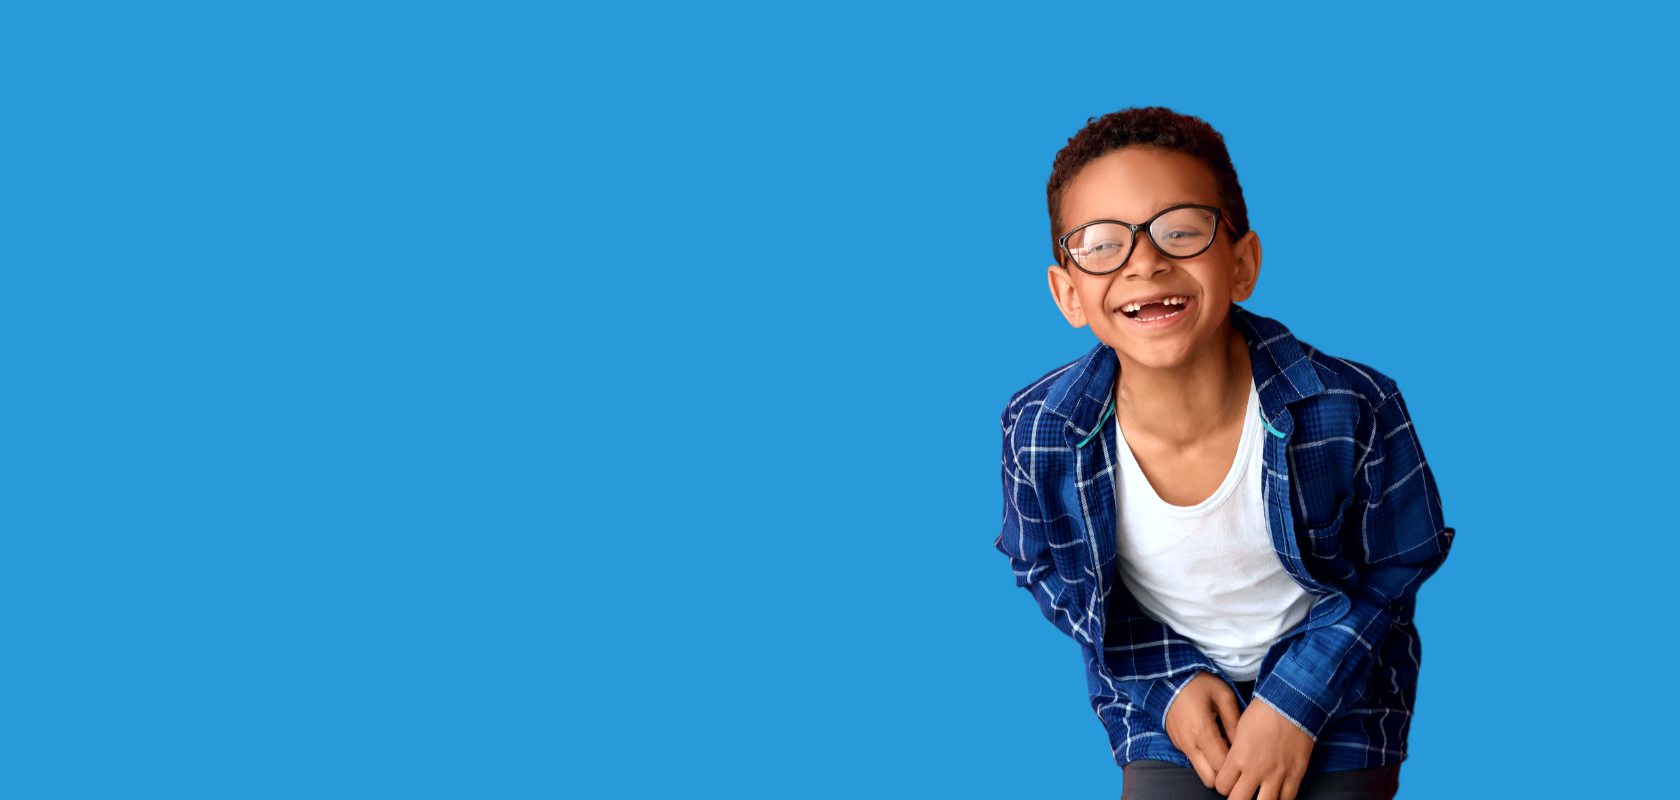 image is of a young boy wearing glasses and smiling.